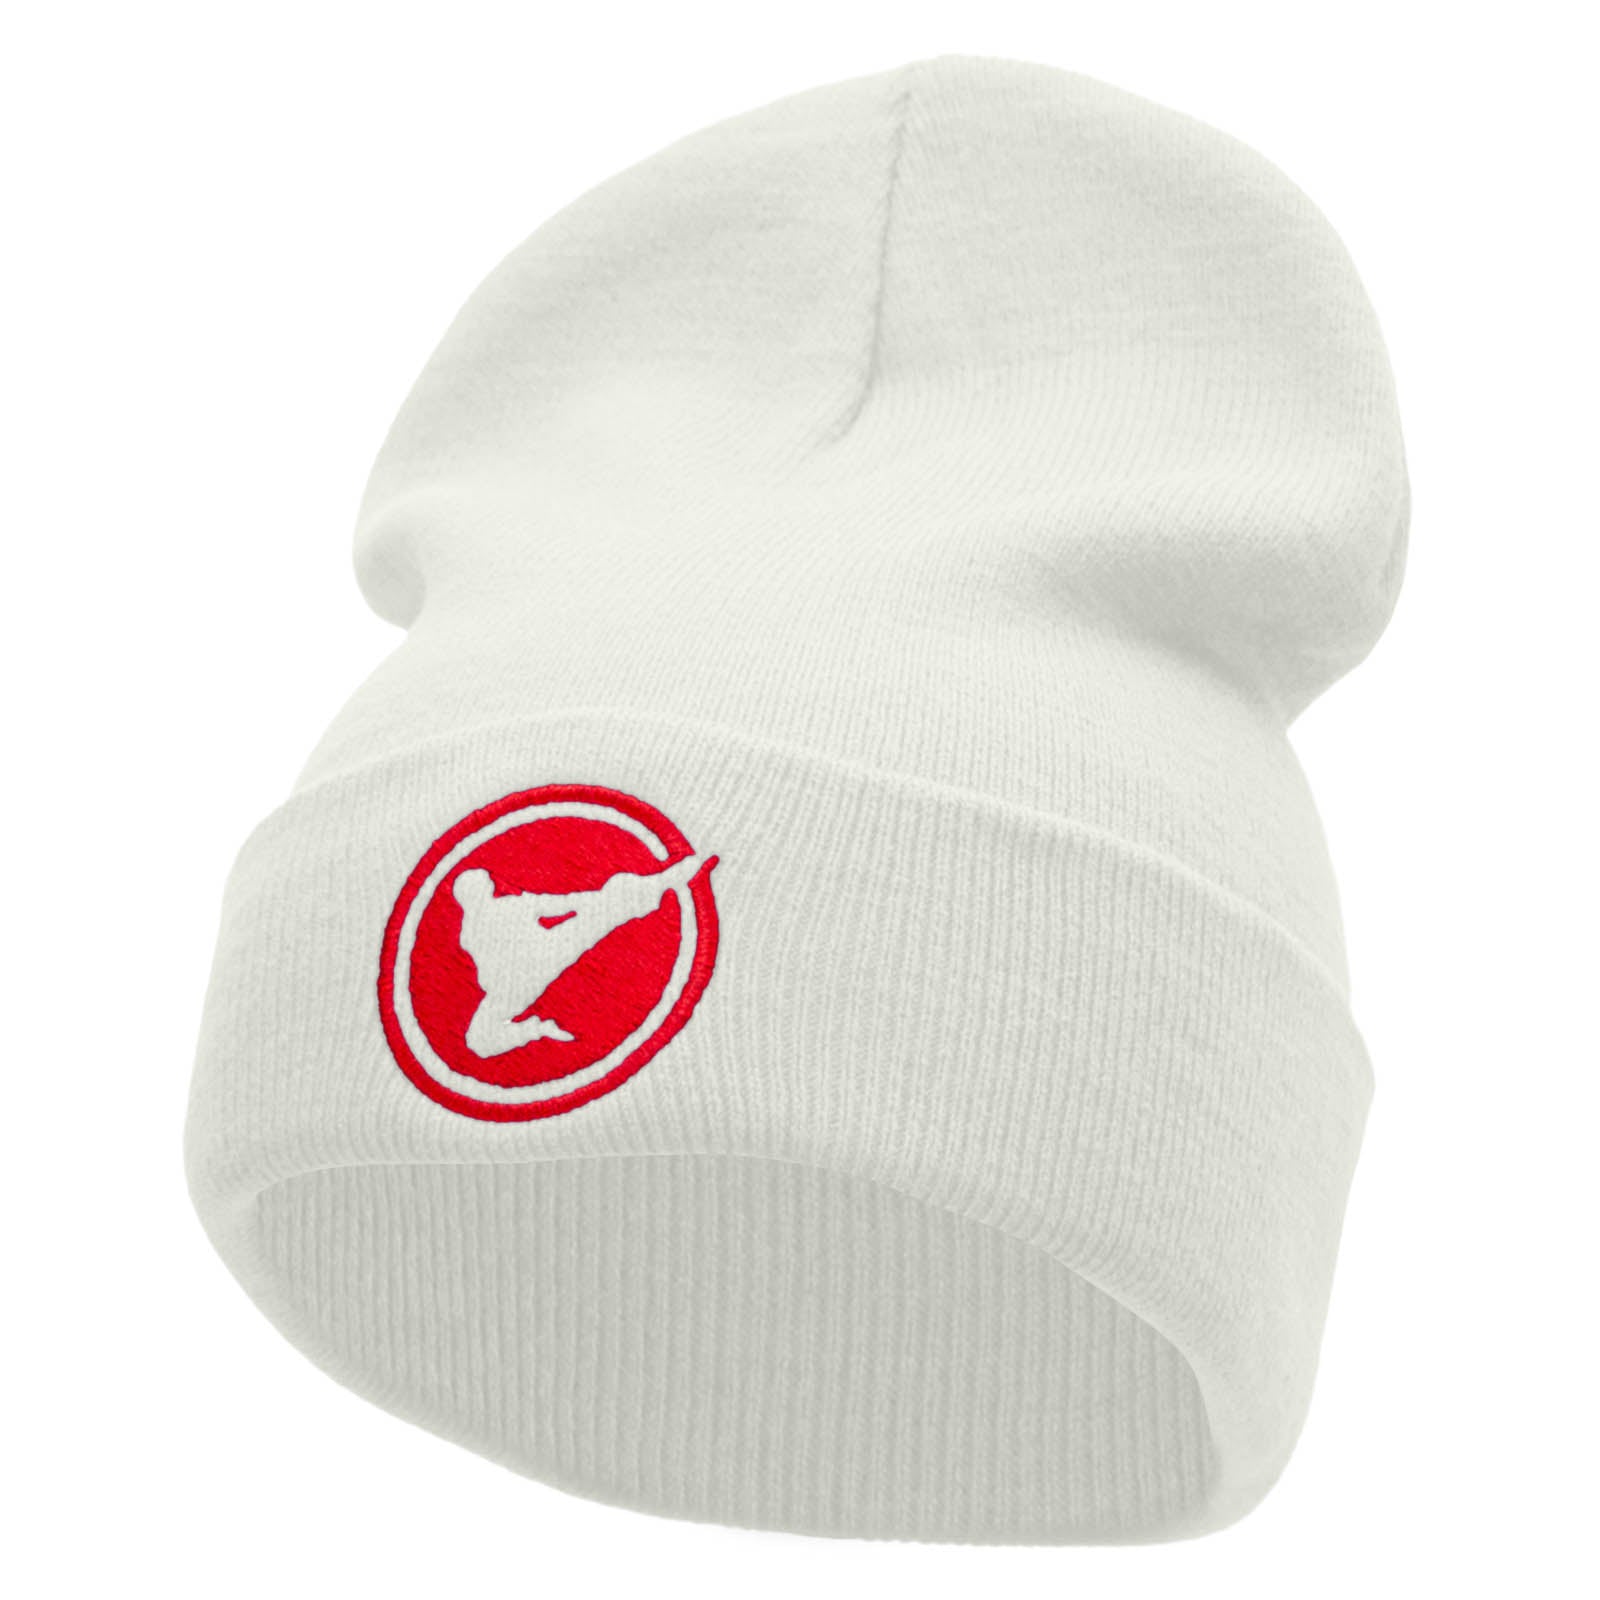 Karate High Kick Embroidered 12 Inch Long Knitted Beanie - White OSFM